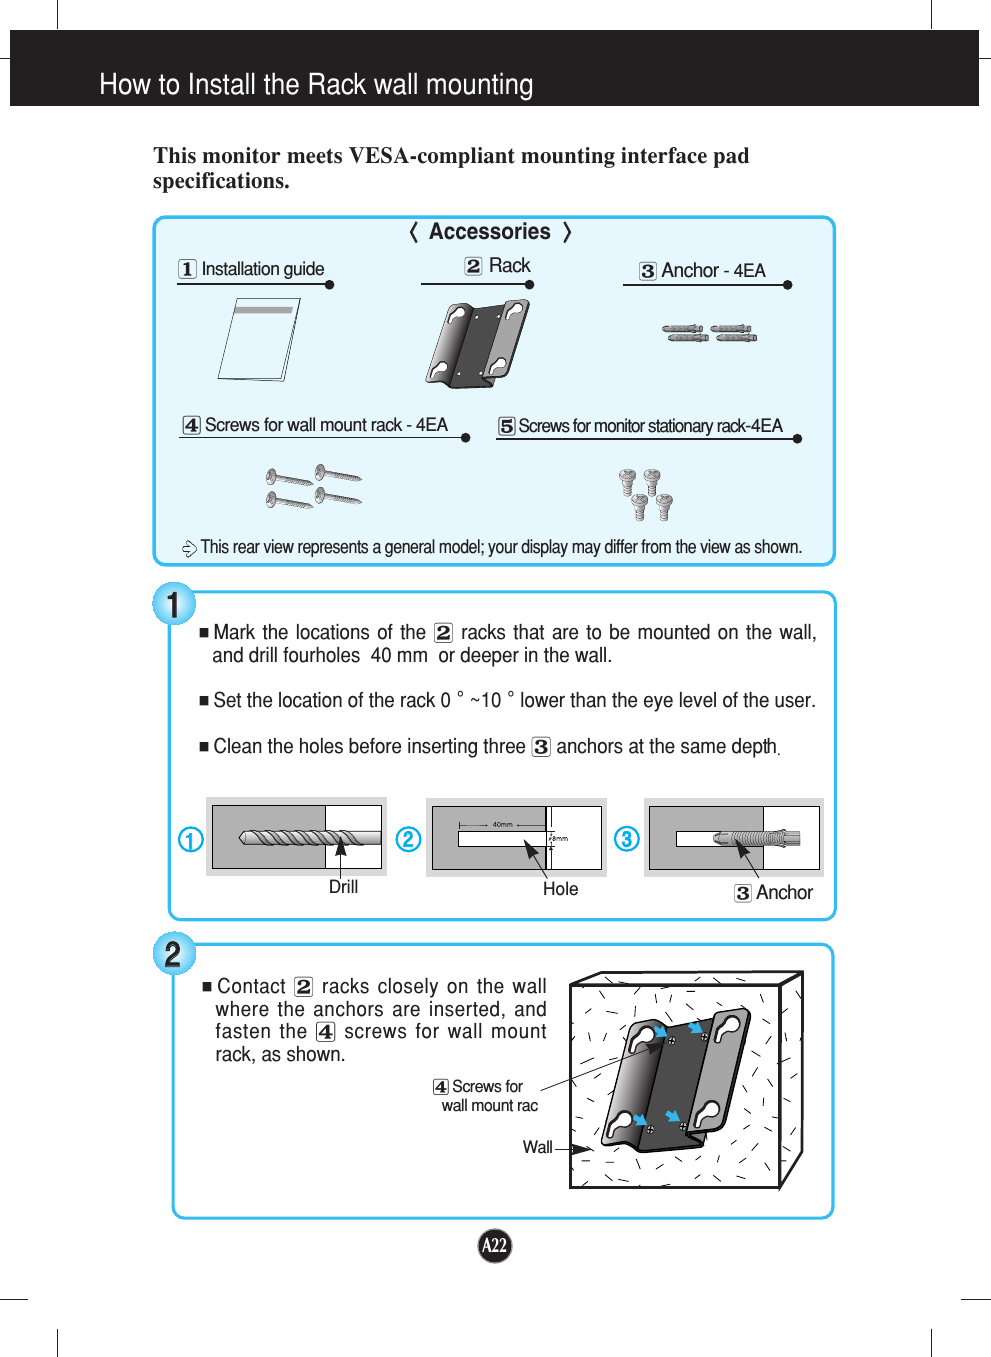 A22How to Install the Rack wall mountingThis monitor meets VESA-compliant mounting interface padspecifications.󰝫Rack󰝭Screws for wall mount rack - 4EA󰝮Screws for monitor stationary rack-4EA󰝬Anchor - 4EA󰝪Installation guide &lt;&lt; Accessories&gt;&gt;■Mark the locations of the 󰝫racks that are to be mounted on the wall,and drill fourholes  40 mm  or deeper in the wall.■Set the location of the rack 0˚~10˚lower than the eye level of the user.■Clean the holes before inserting three 󰝬anchors at the same depth.1122Drill Hole3311■Contact 󰝫racks closely on the wallwhere the anchors are inserted, andfasten the 󰝭screws for wall mountrack, as shown.Wall󰝭Screws for wall mount rac22󰝬AnchorThis rear view represents a general model; your display may differ from the view as shown.